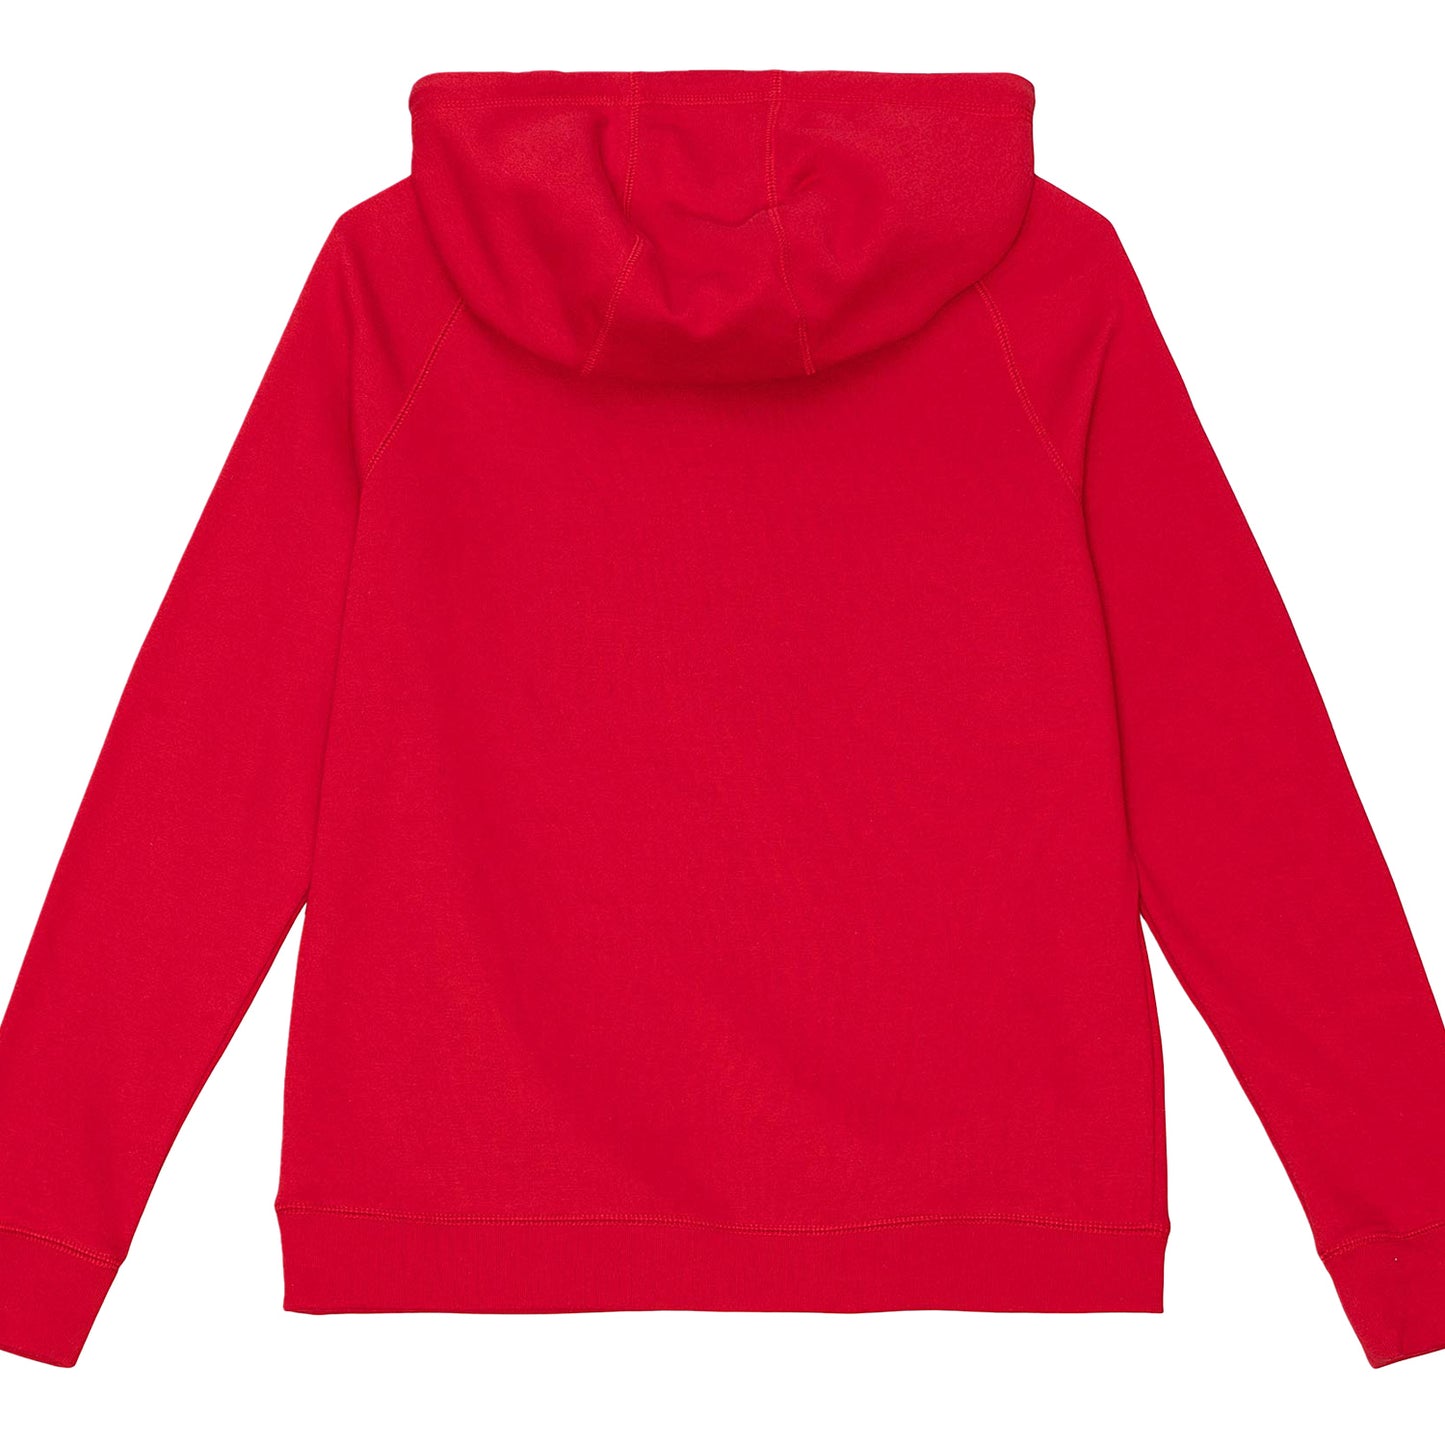 Ladies Chicago Bulls Mitchell & Ness Funnel Neck Hooded Sweatshirt in red - back view